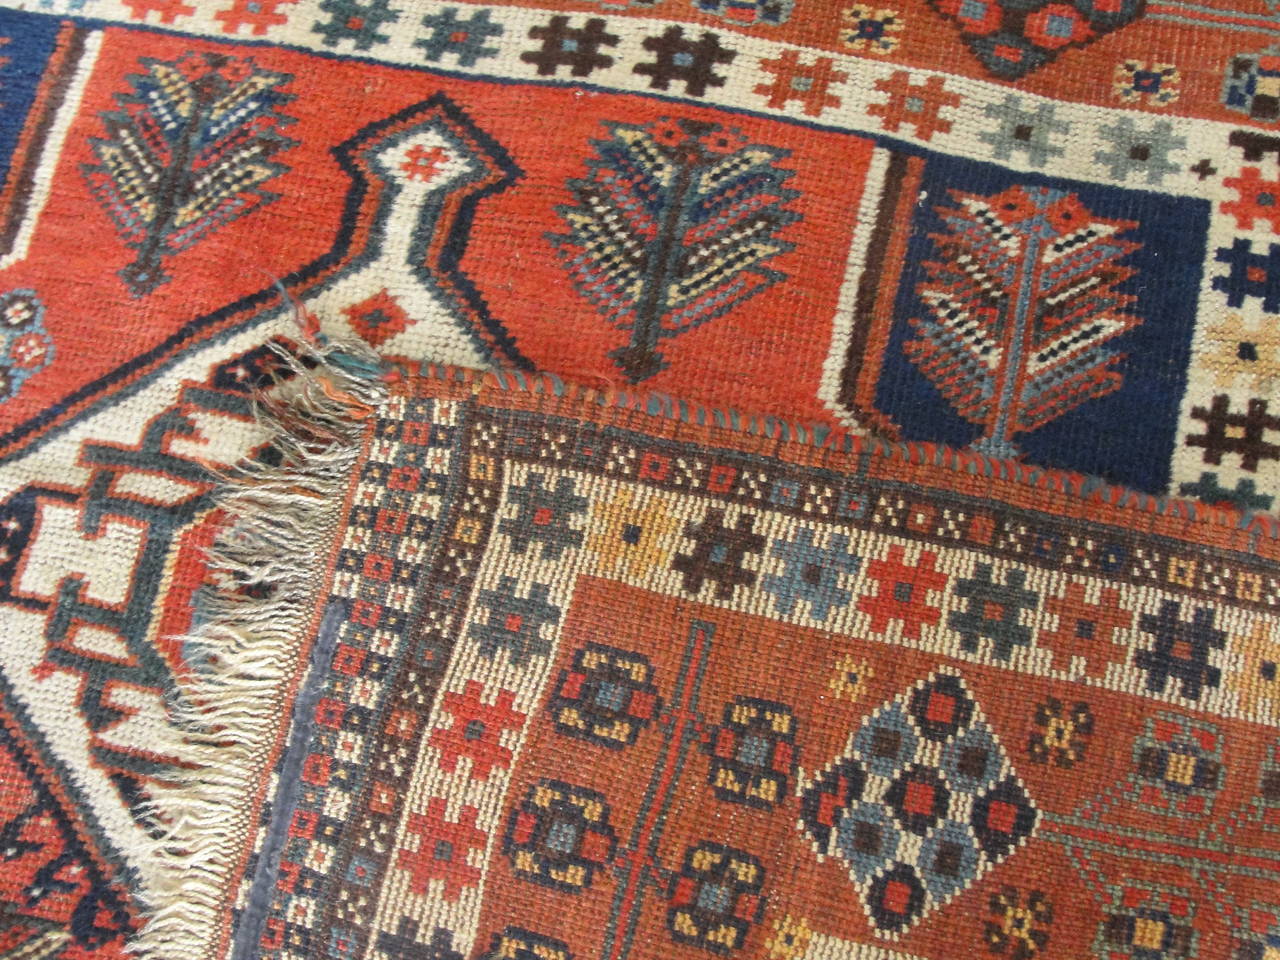 Unusual size and shape Kazak, Caucasian rug.
Made in small village for local use and not for export even though it find his way to our hand.
The wool is vegetable dye color and very Primitive bold geometric design and symbols.
Kazak rugs are a